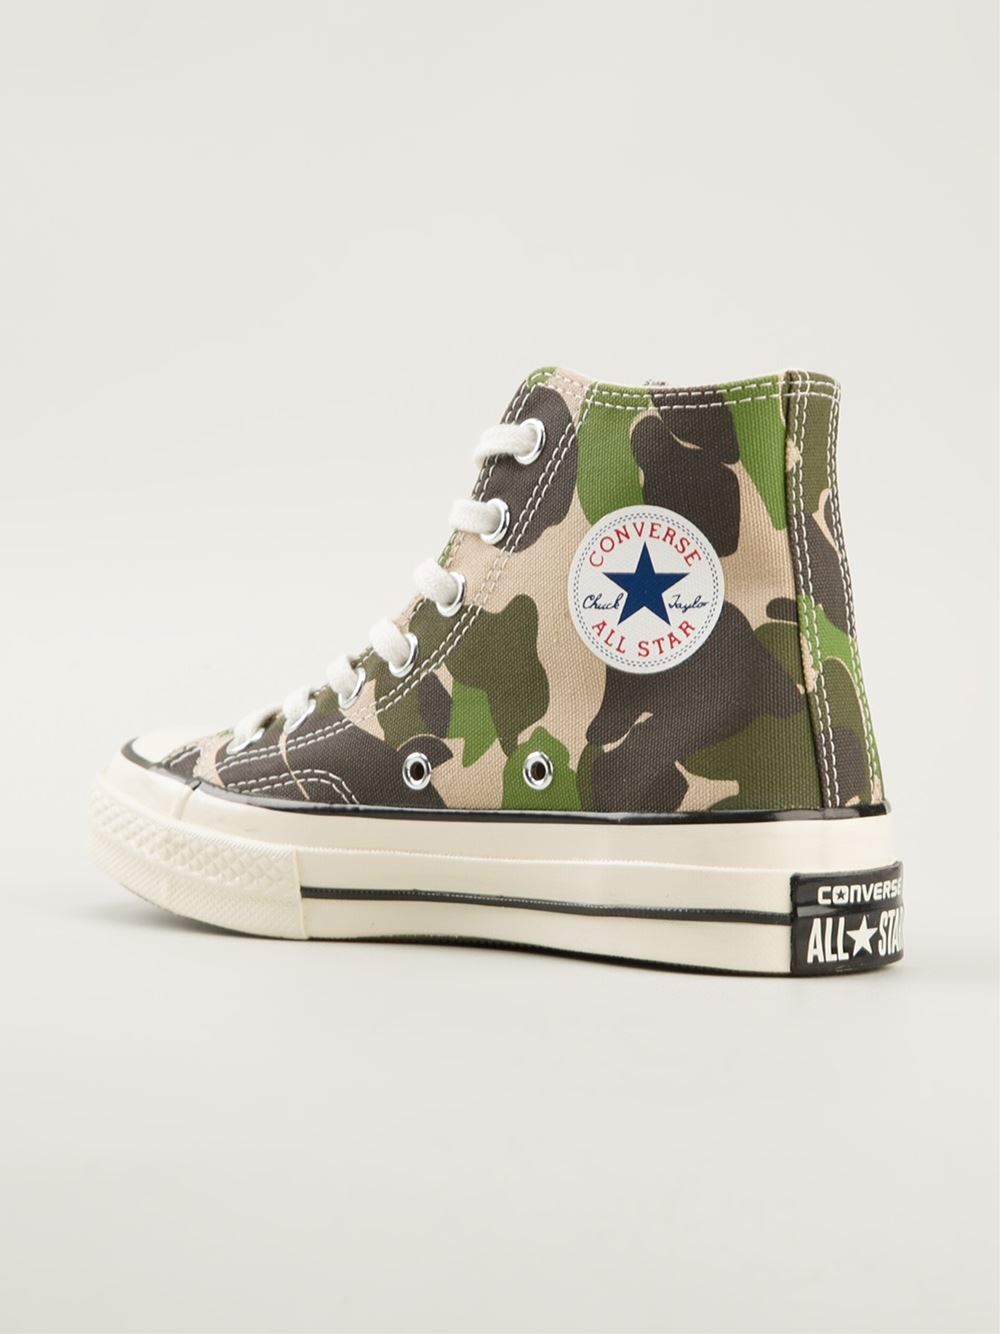 Lyst - Converse Camouflage 'Chuck Taylor' Hi-Top Sneakers in Green for Men